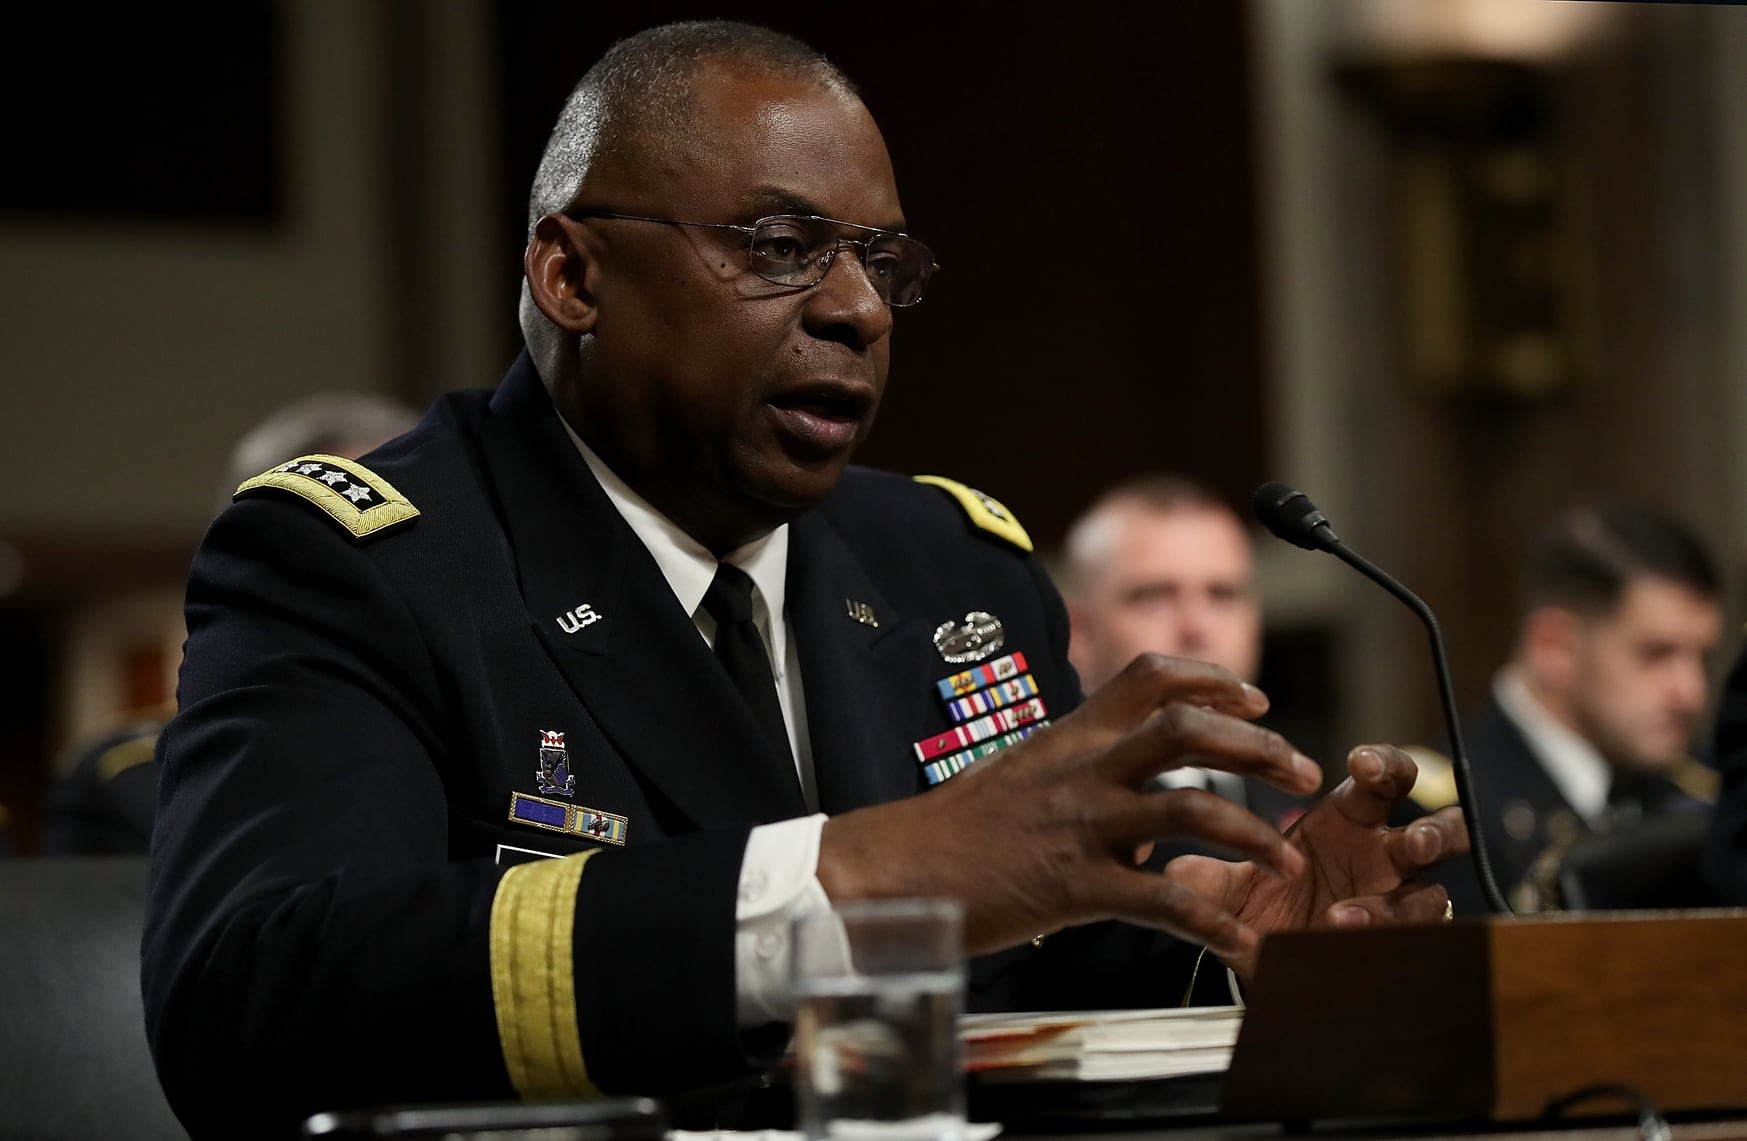 FILE- In this March 8, 2016, file photo, then-Army Gen. Lloyd Austin III, commander of the U.S. Central Command, testifies before the Senate Armed Services Committee in Washington, DC. (Photo by Win McNamee/Getty Images)